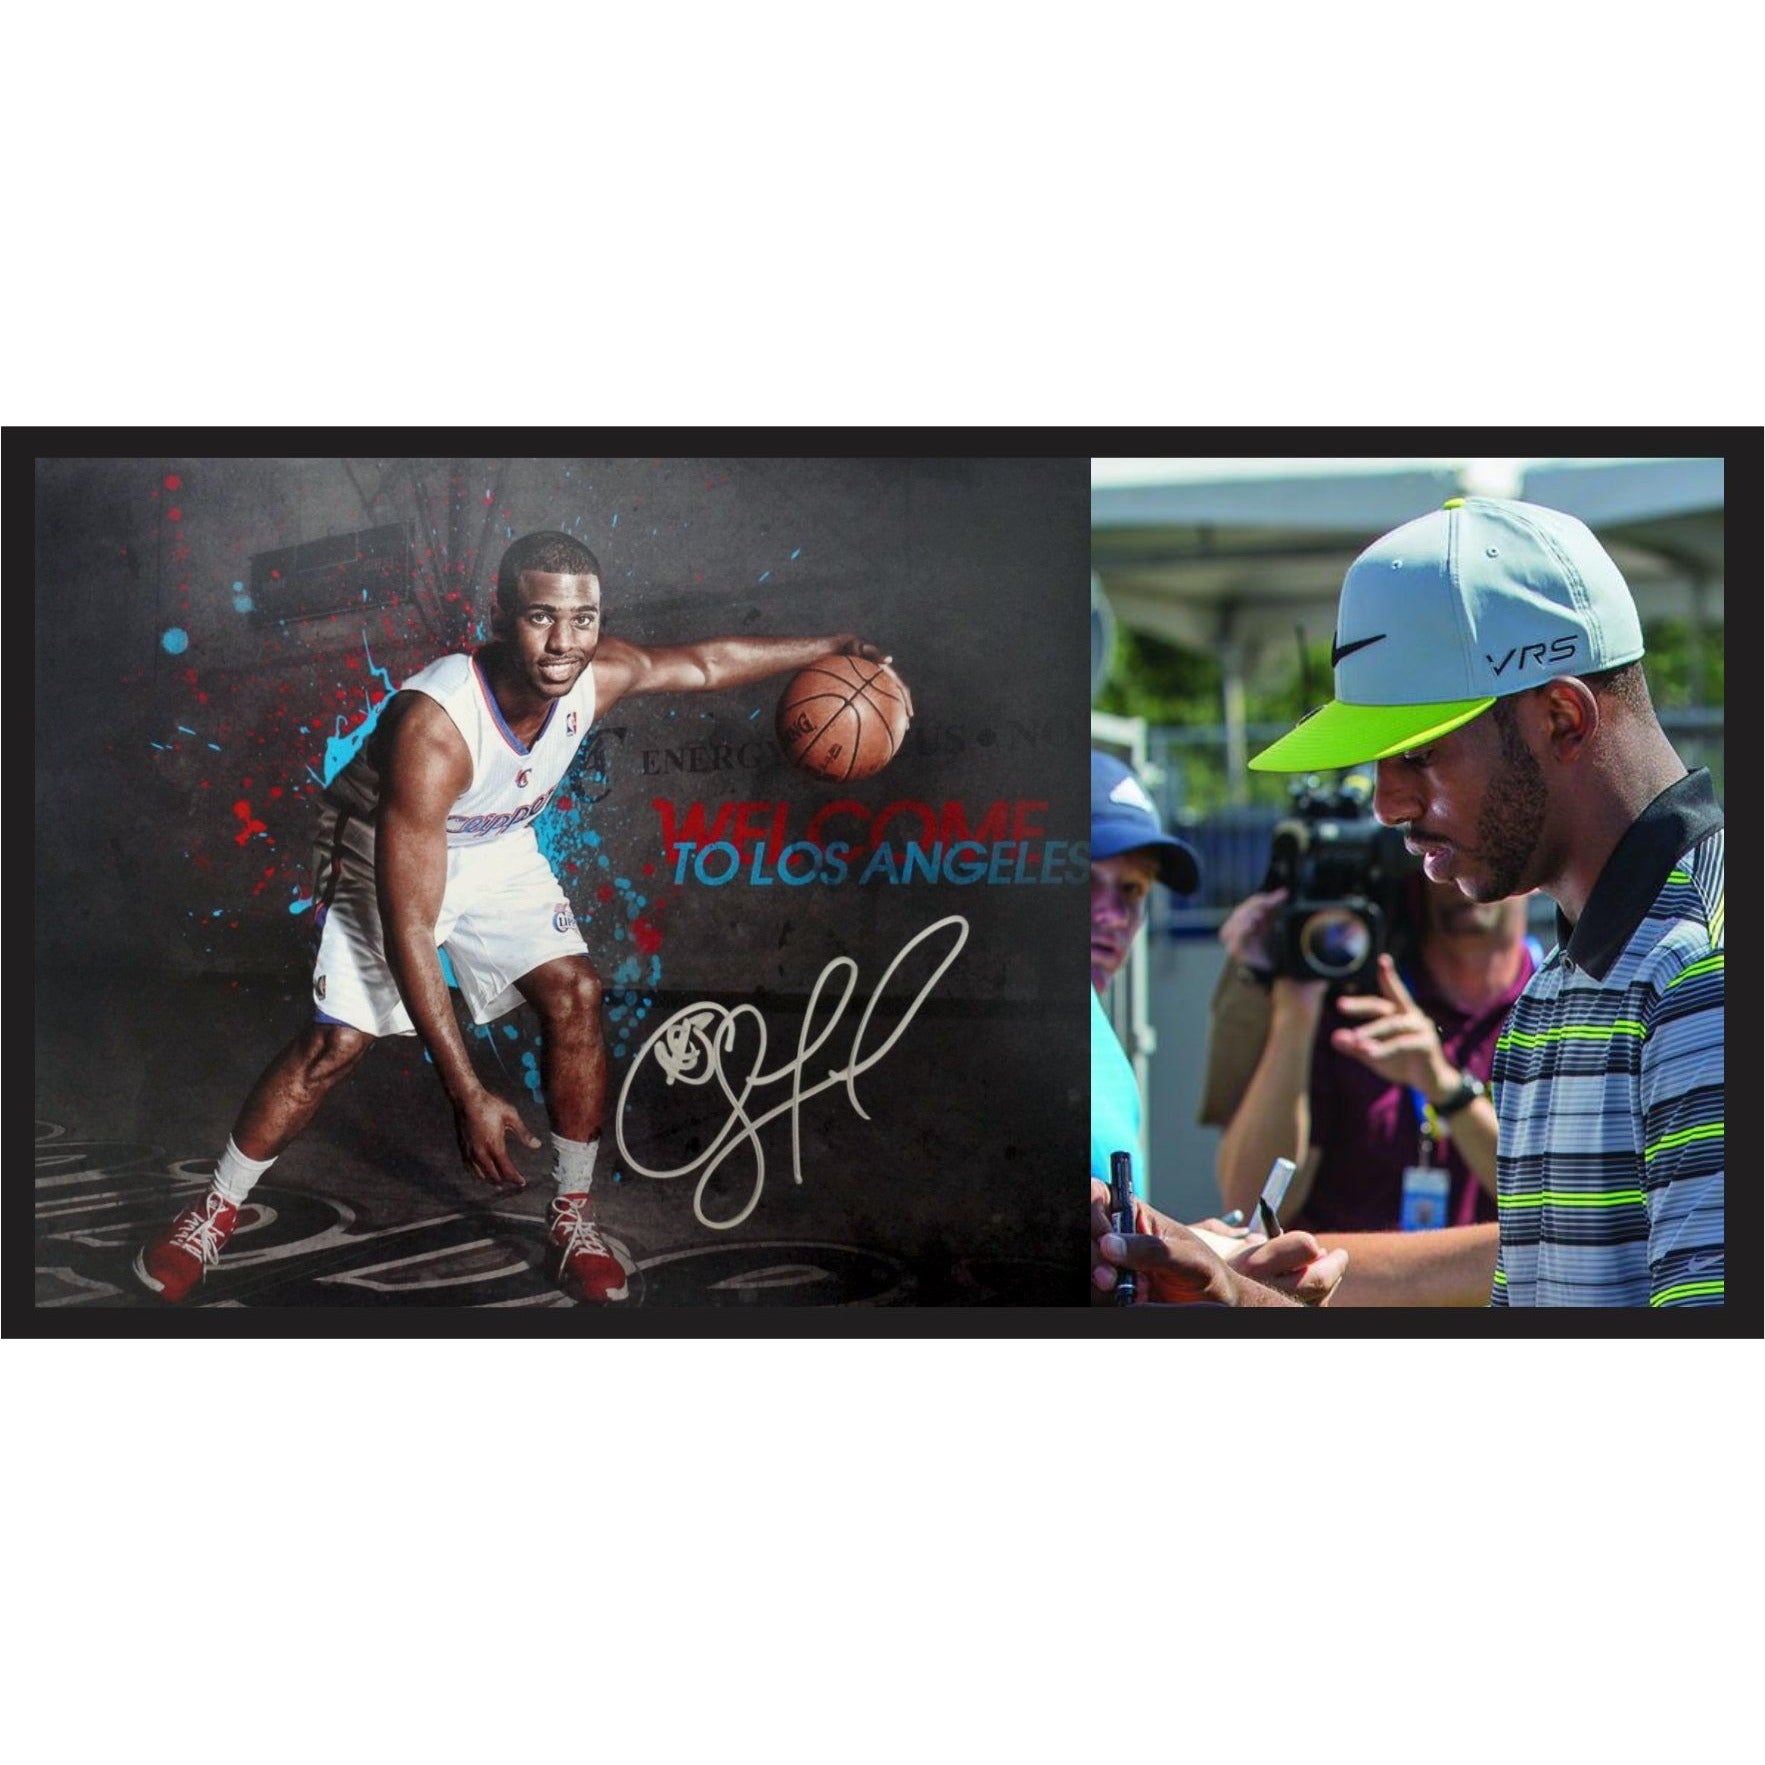 Chris Paul Los Angeles Clippers 8 x 10 photo signed with proof